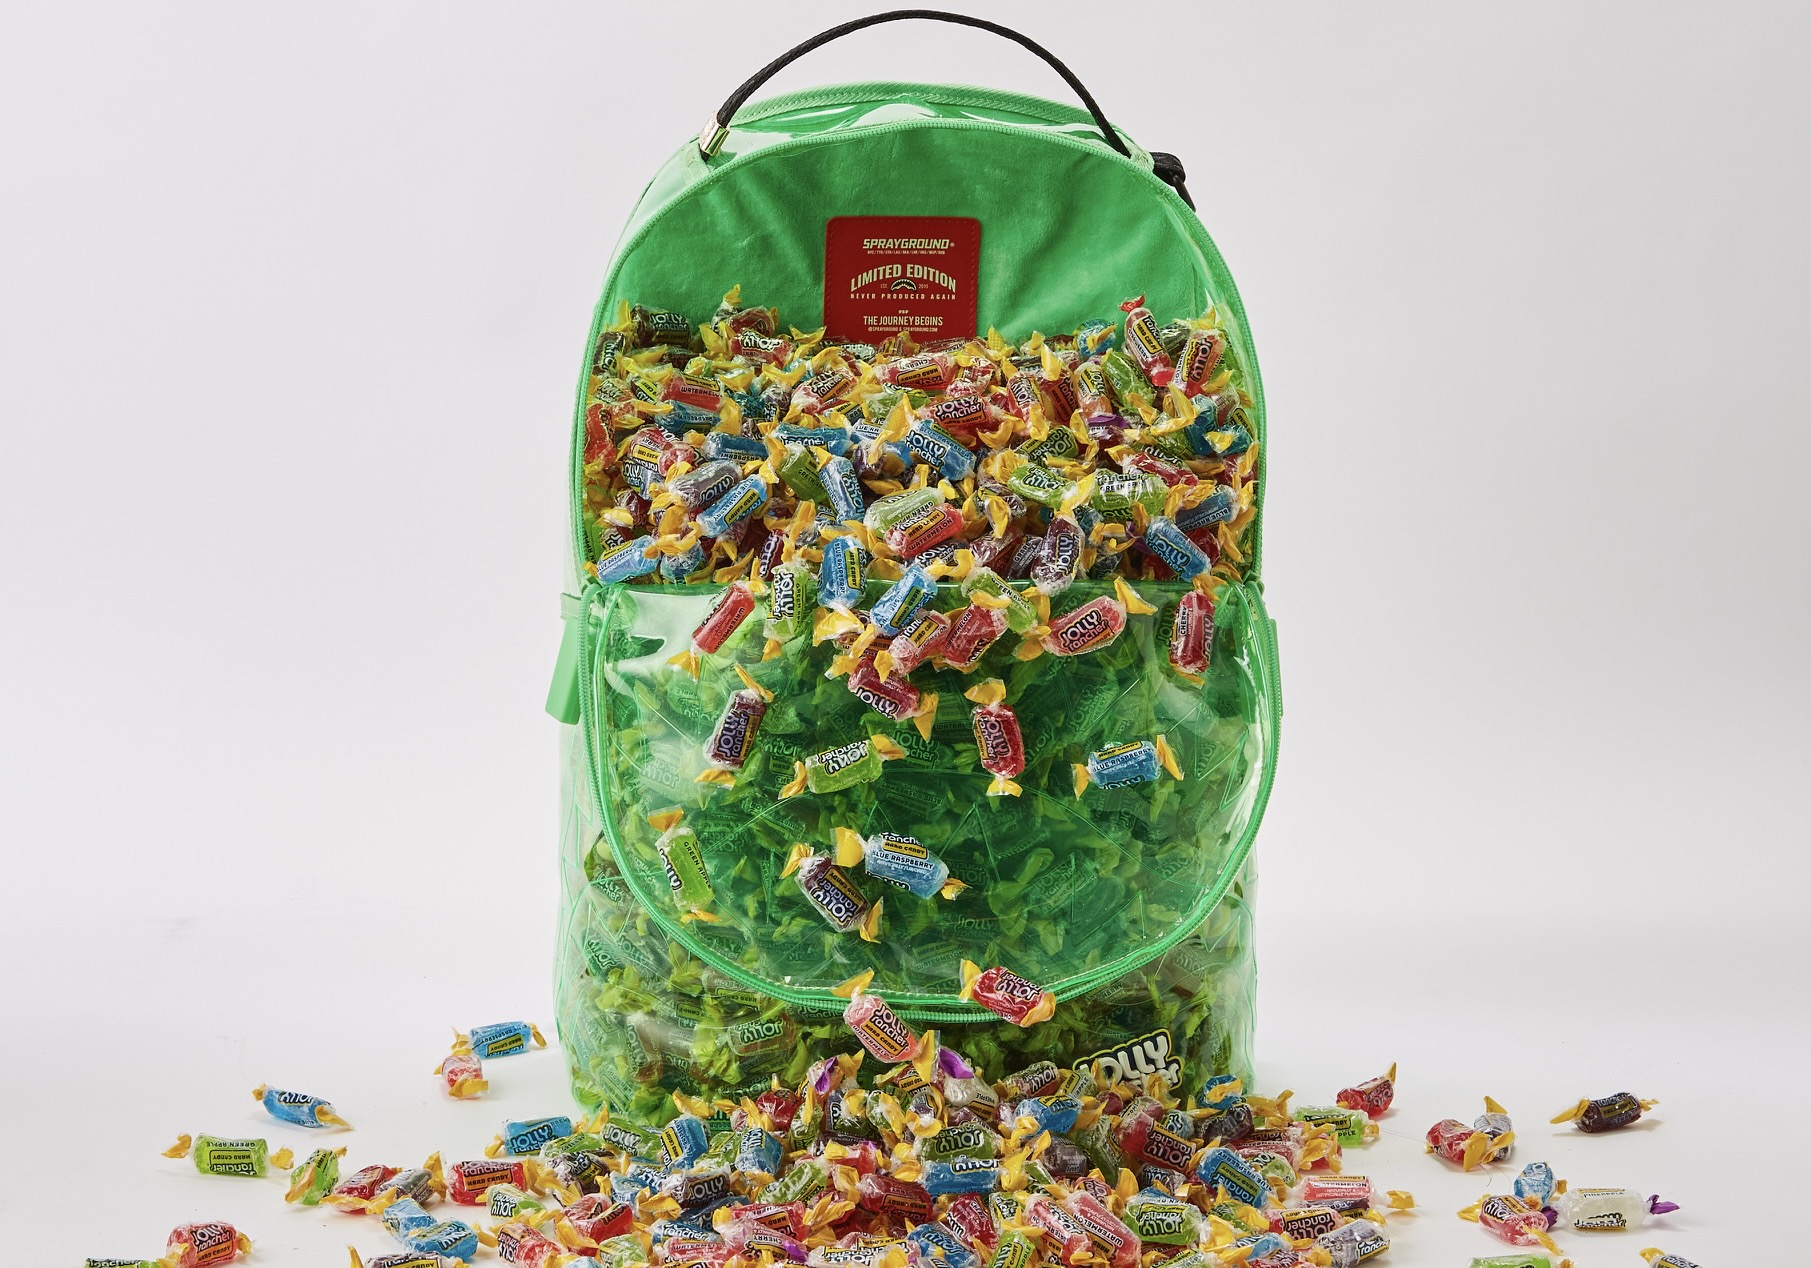 Sprayground Releases Tasty Backpacks With Jolly Rancher Theme